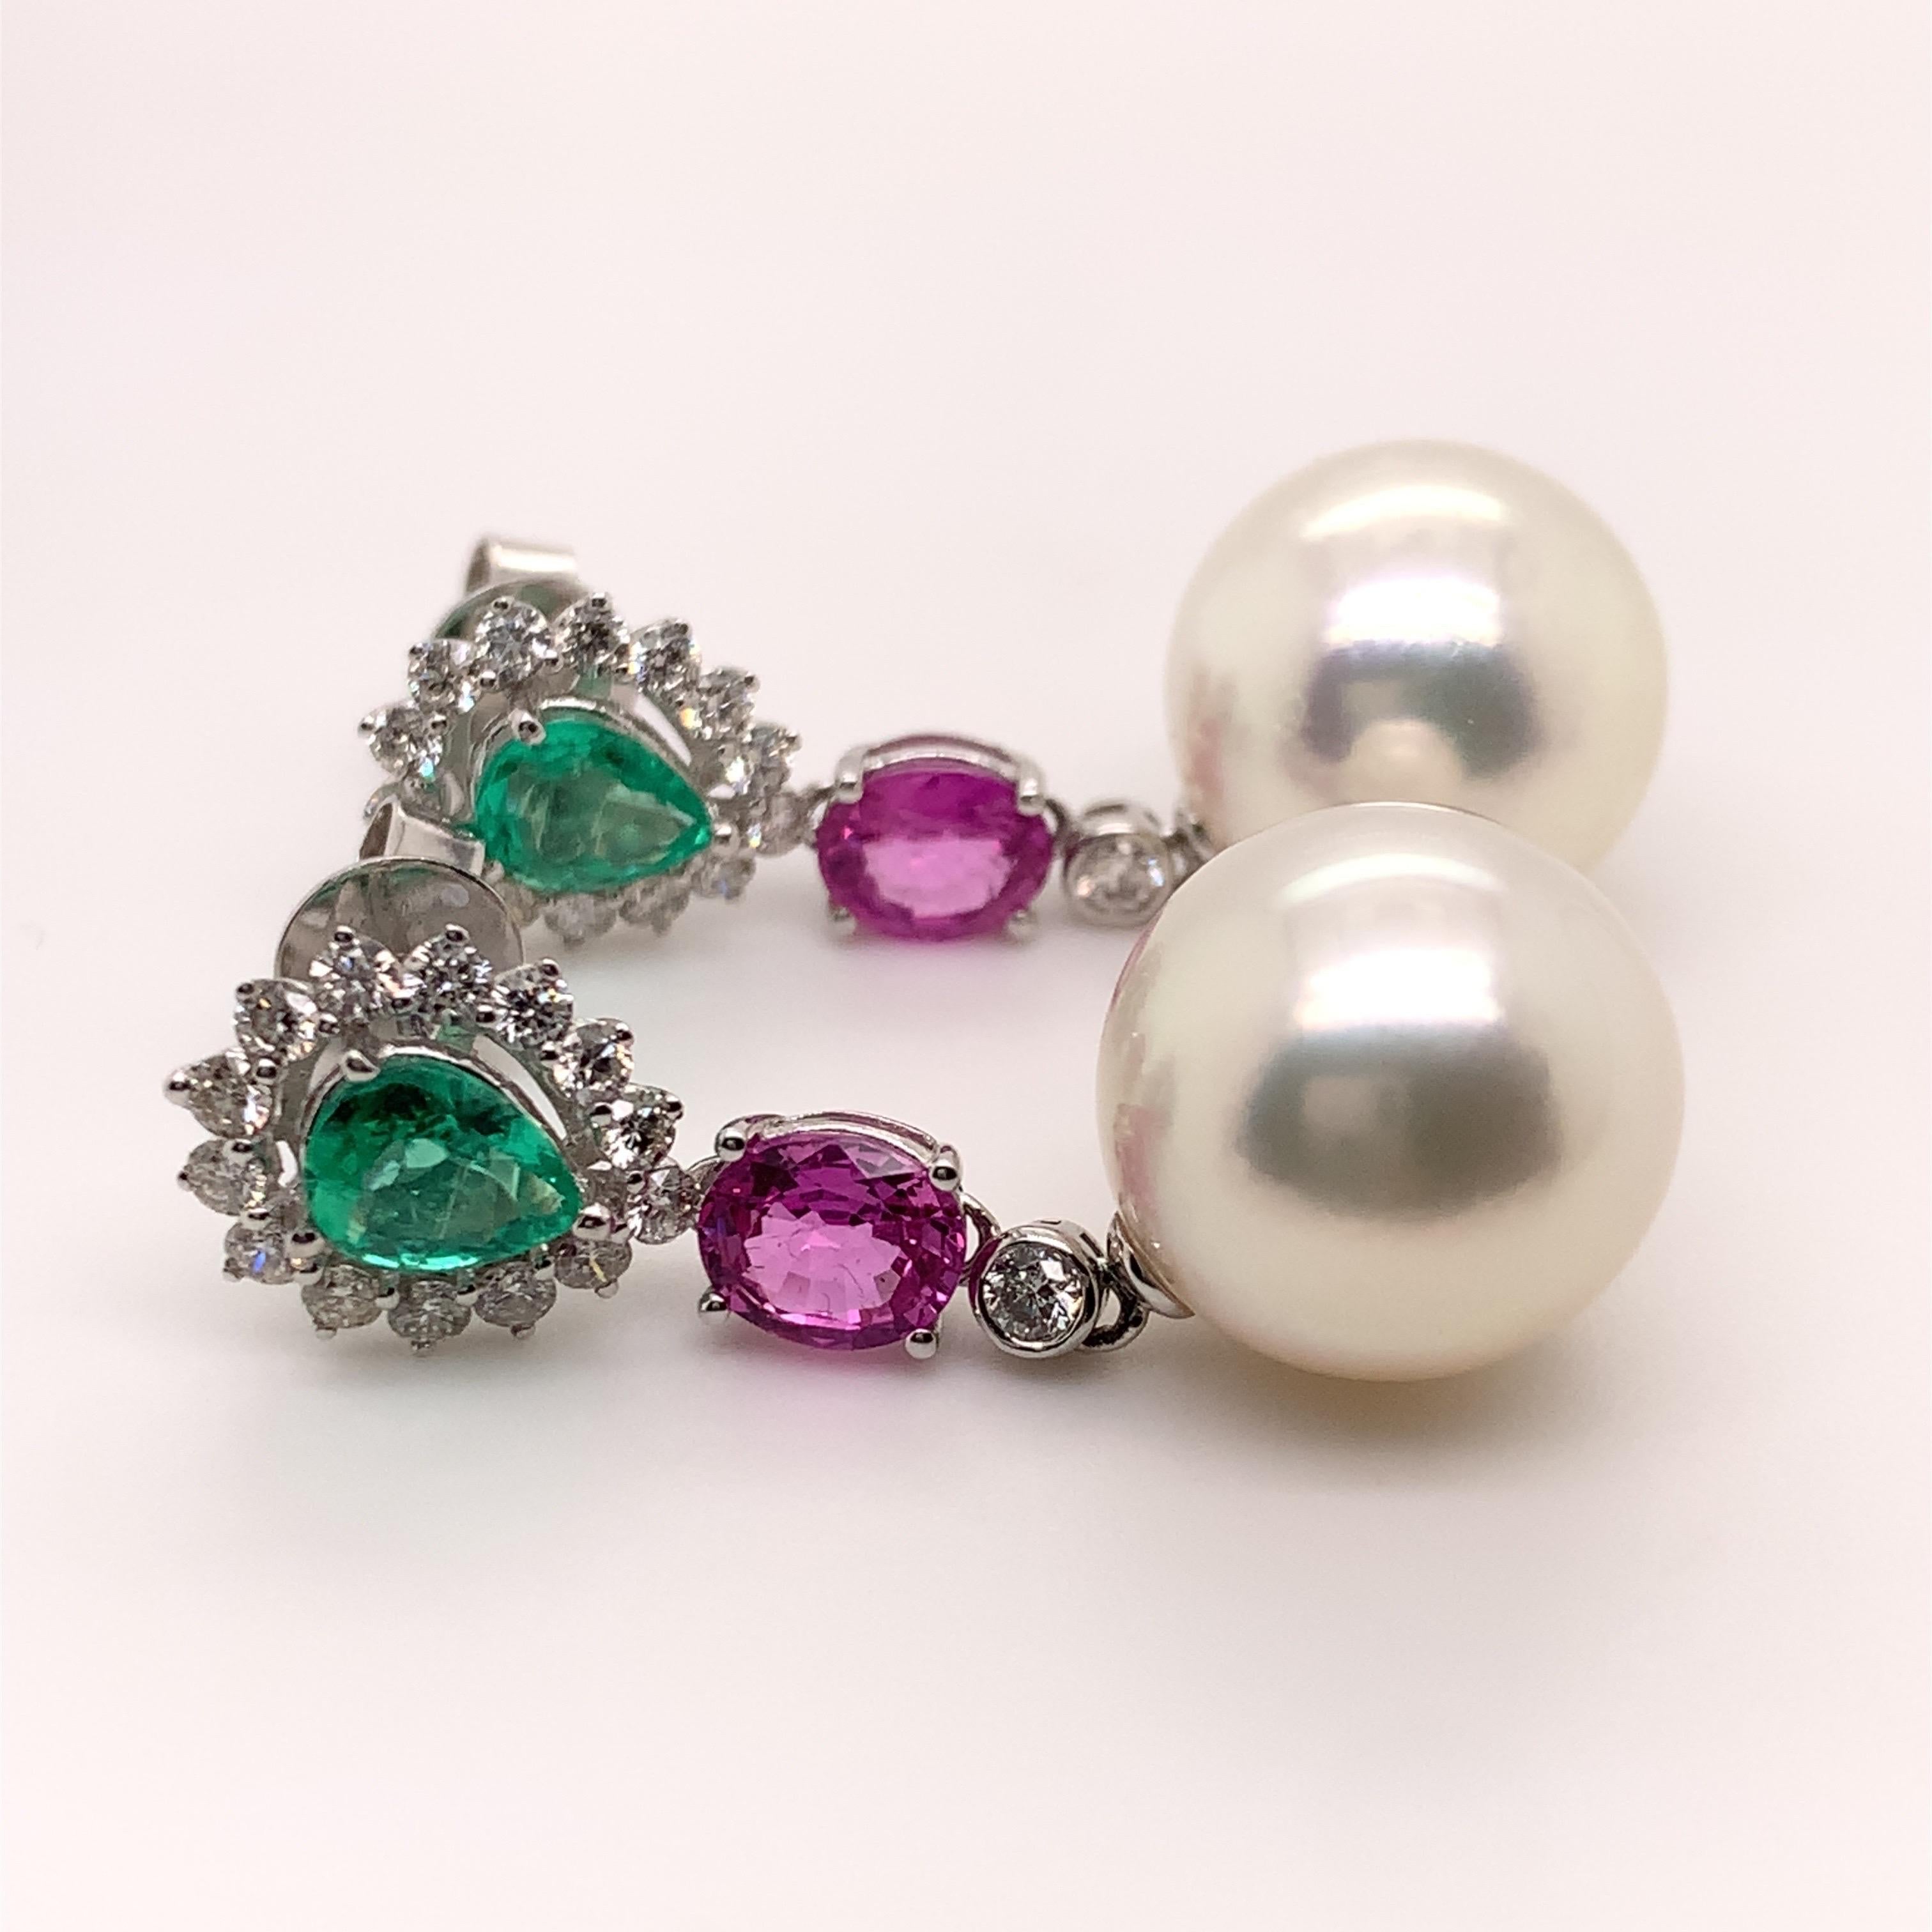 Stunning South Sea White Pearl Earrings. High brilliance, 12.8mm round white with silver overtone South Sea pearls accented with pear faceted lively green matching emerald surrounded with round brilliant cut diamonds and oval faceted lively matching